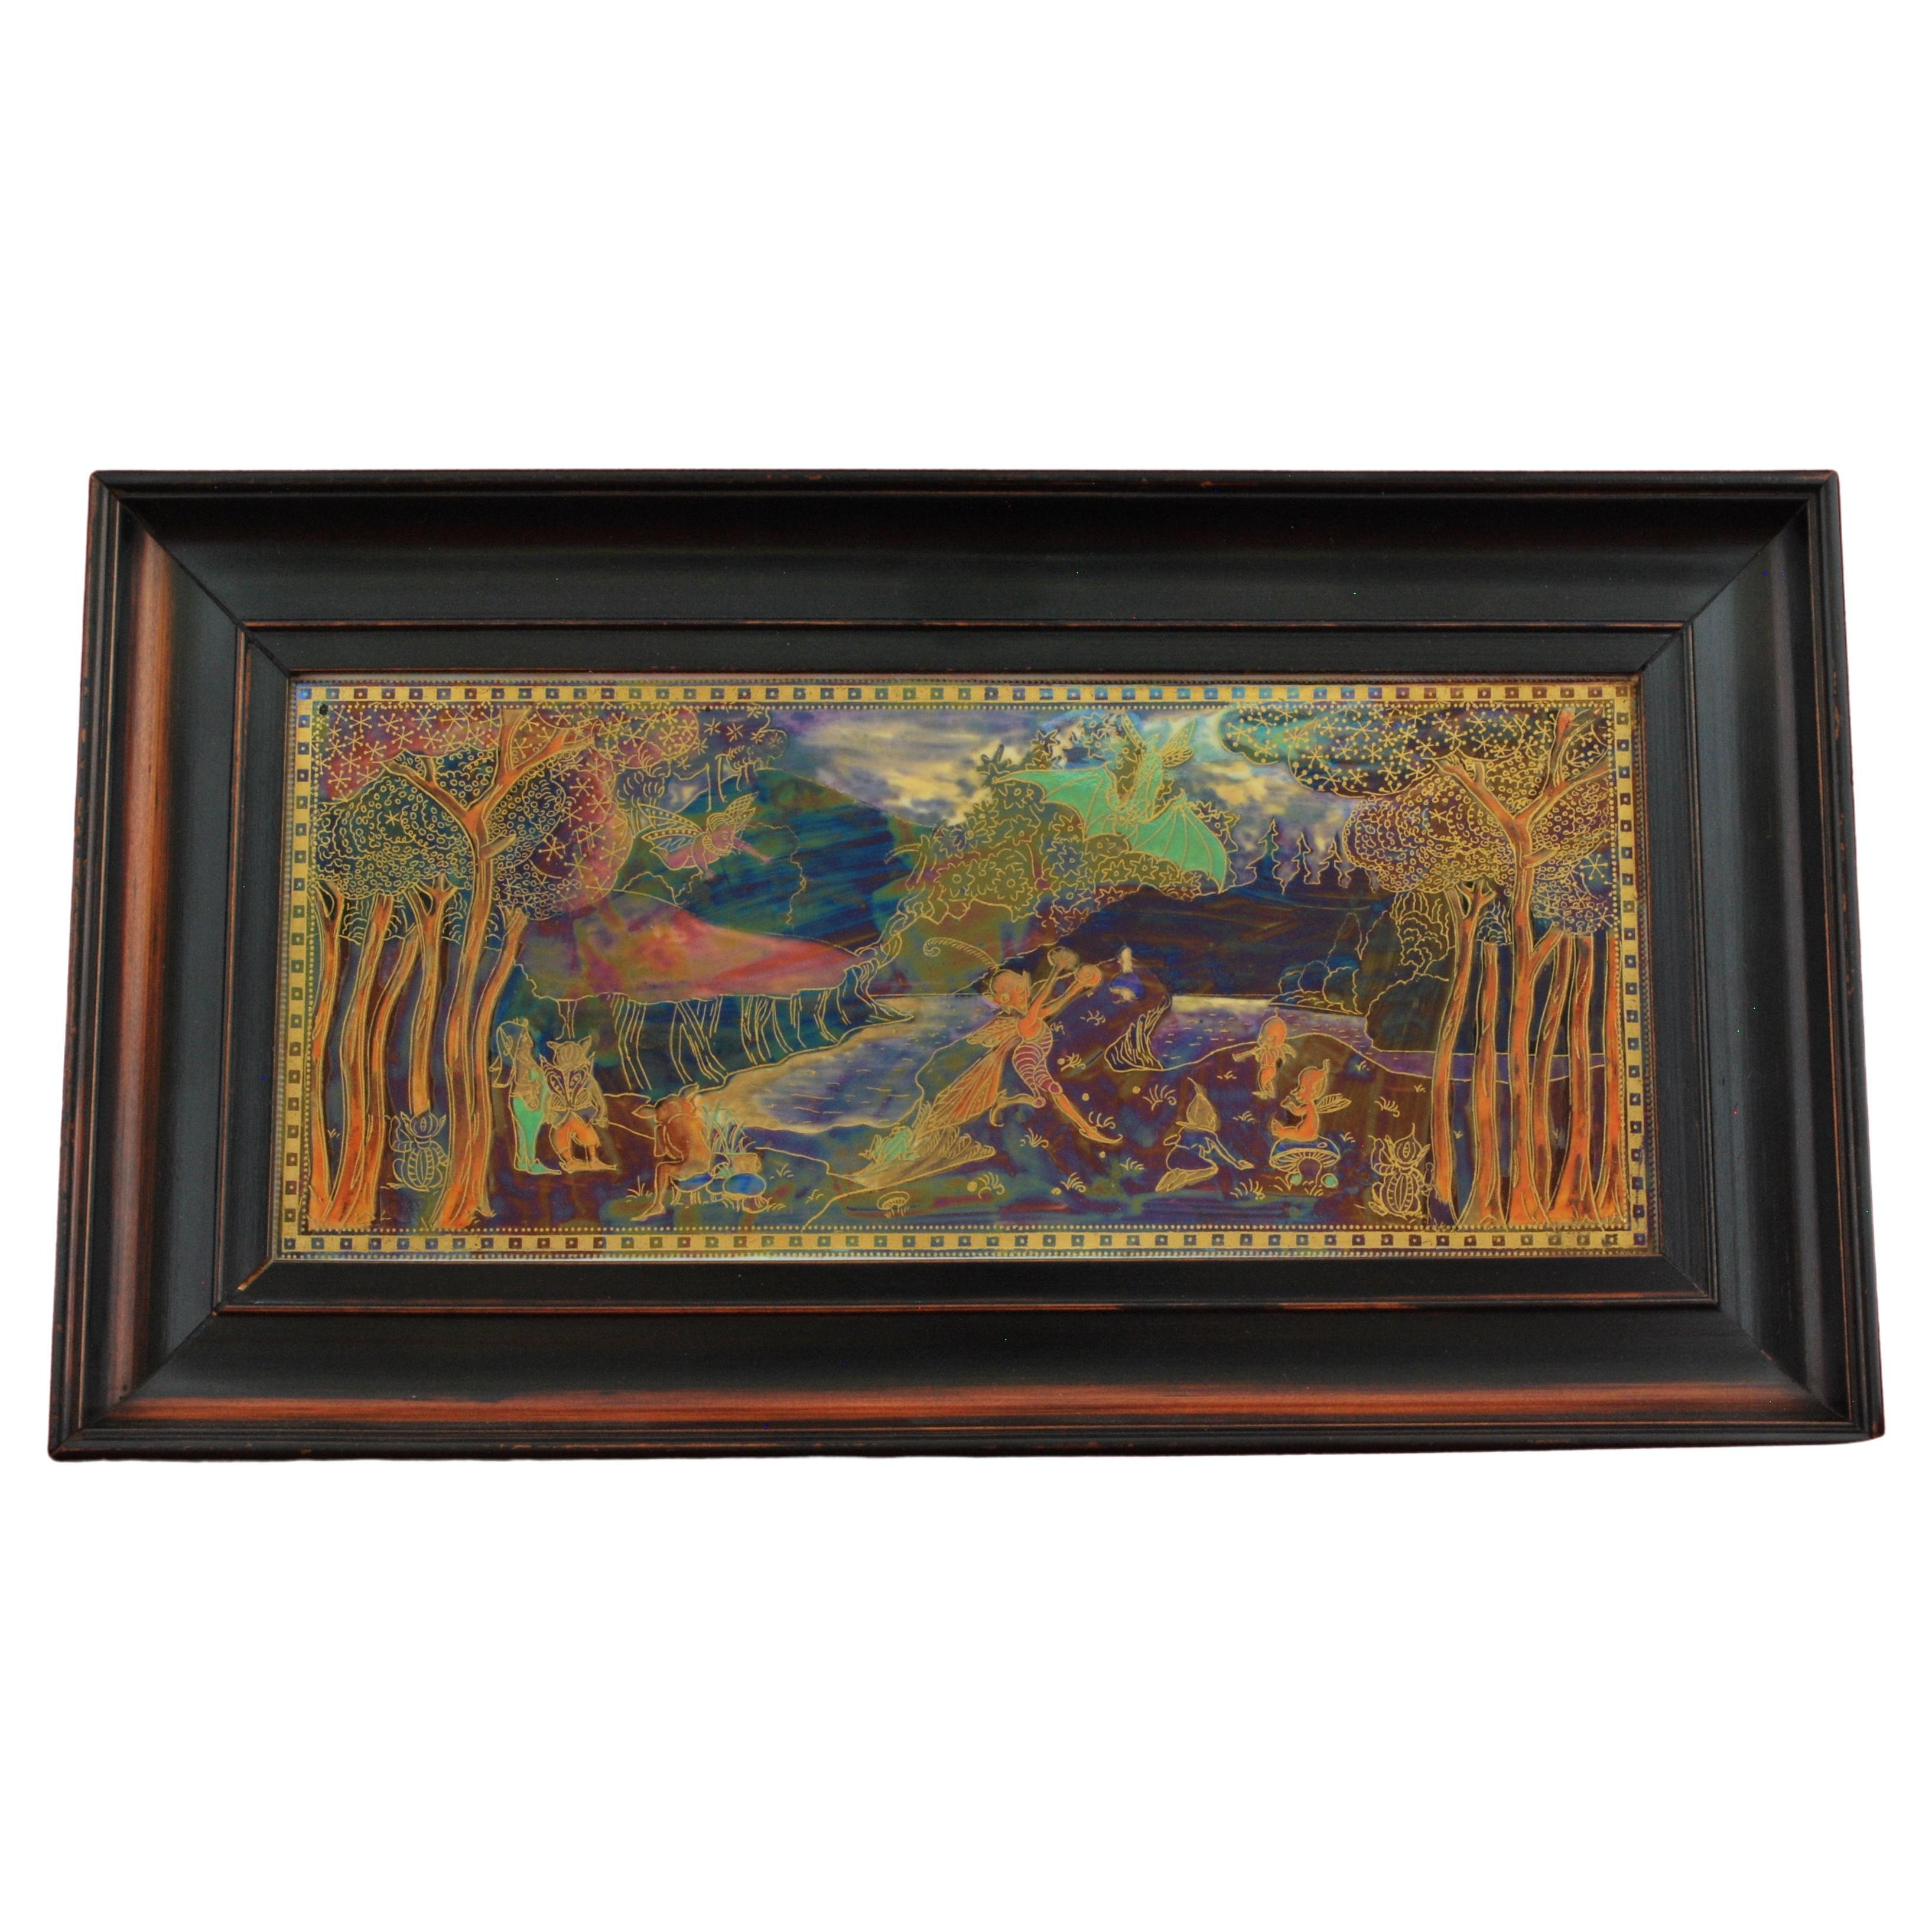 Fairyland Lustre Plaque 'Picnic' by River, Wedgwood, circa 1925